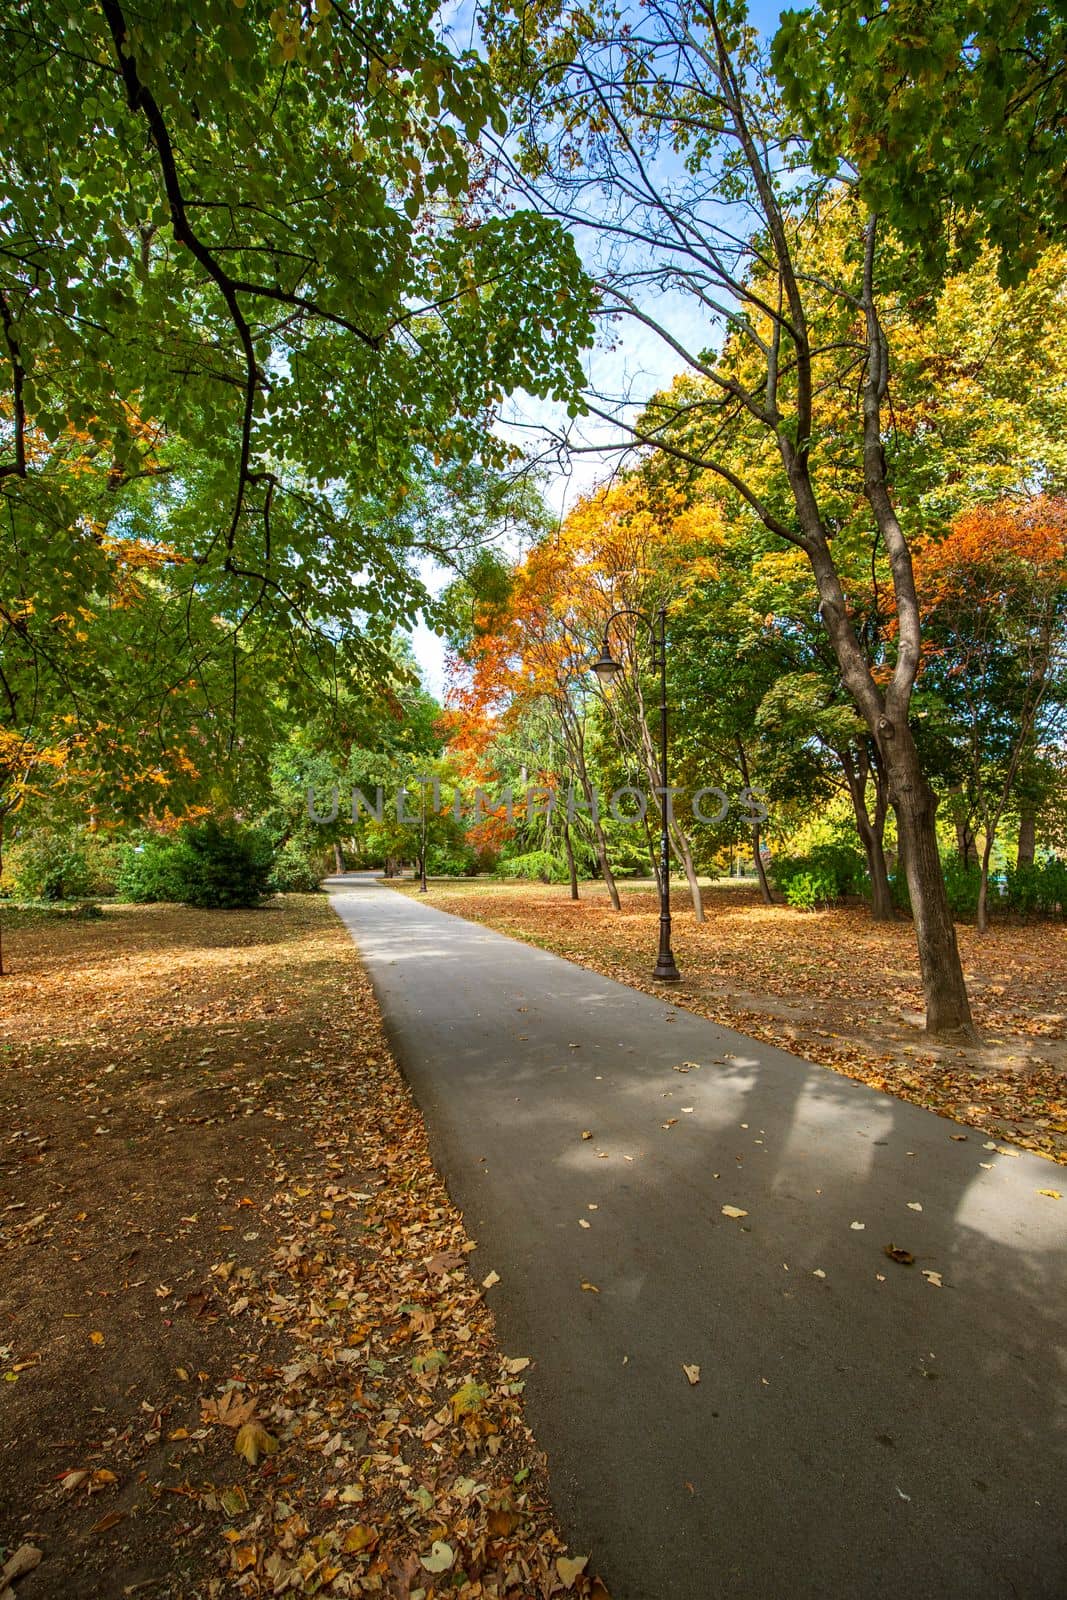 Autumn landscape - trees and fallen leaves in the city park. Vertical view